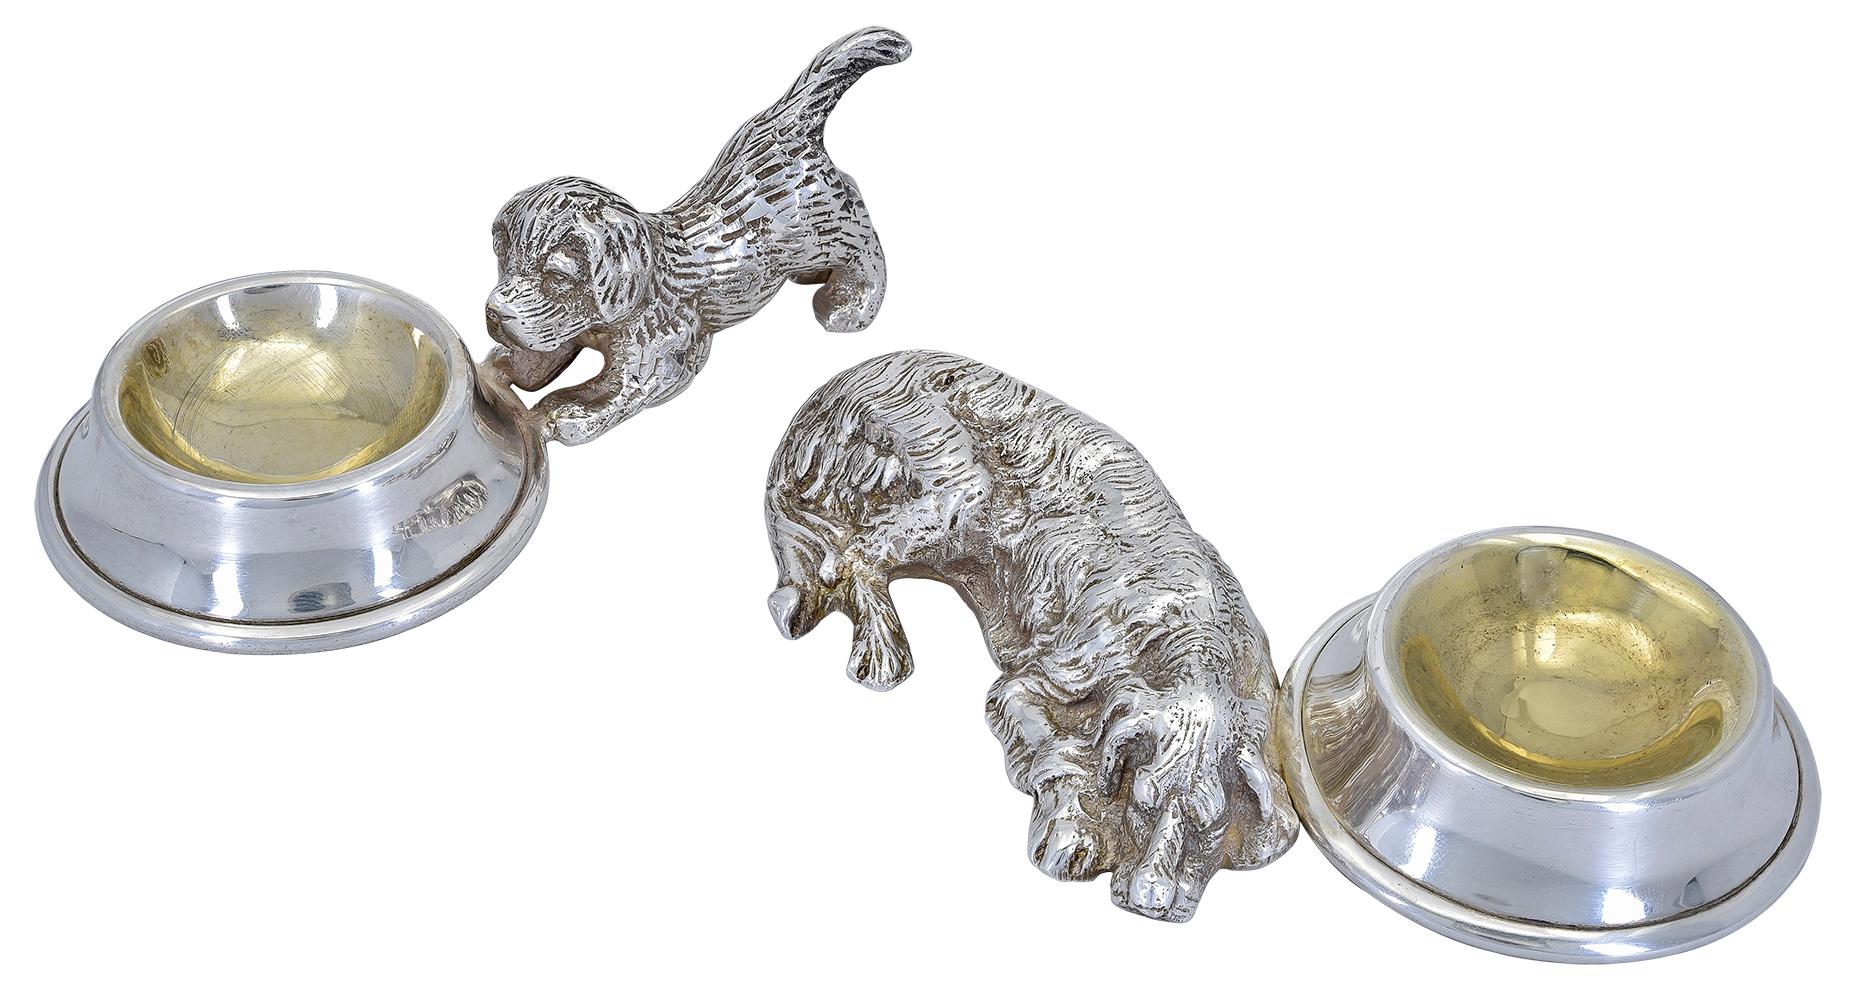 The best in show :  a pair of silver plate figural dogs with guilded bowls.  A large posed dog laying down next to a figural bowl with guilded interior, second dog is posed in a downward position next to a figural bowl with guilded interior.  